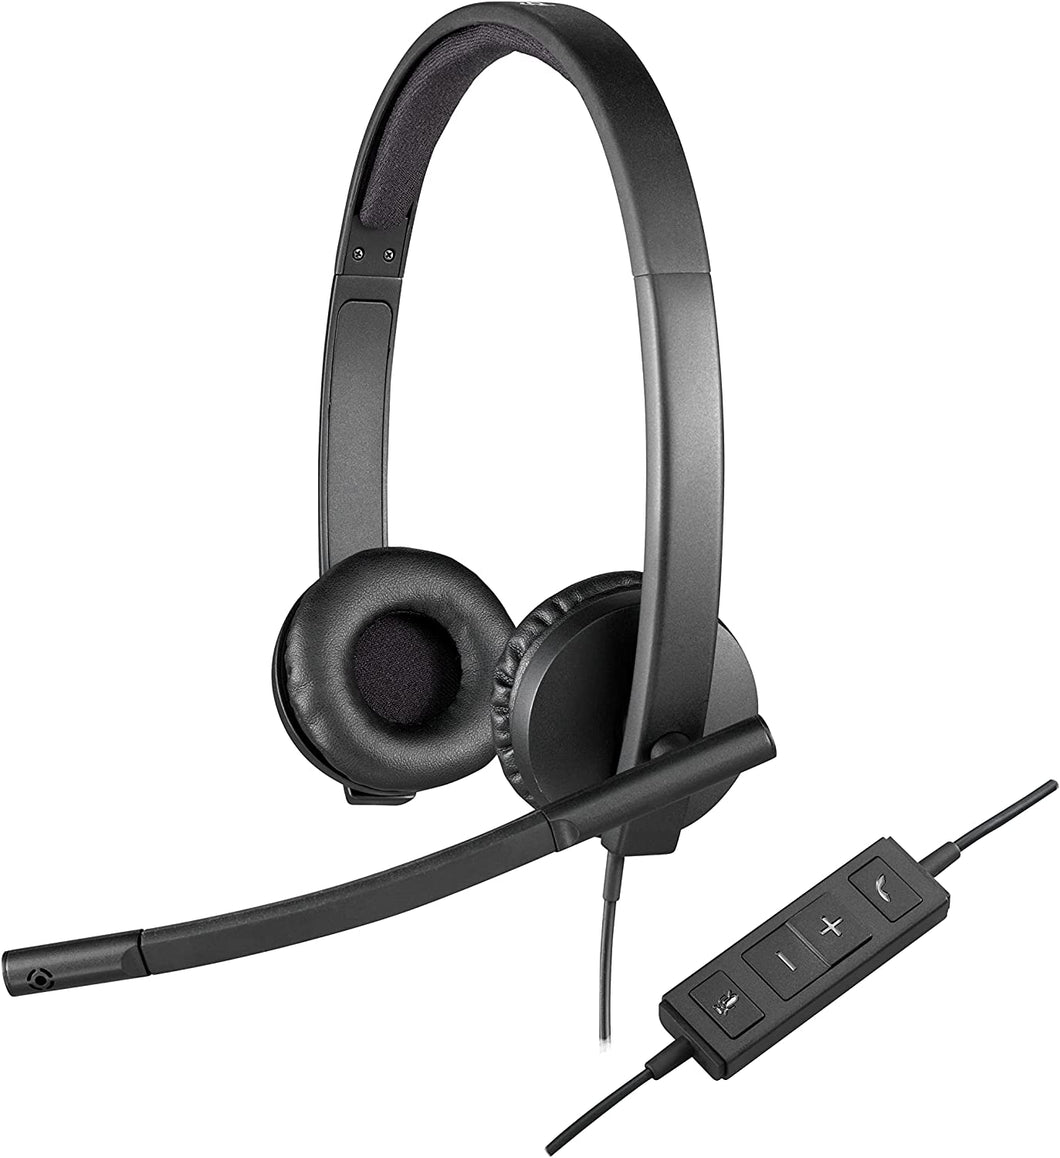 Logitech USB Headset H570e Stereo with Noise Cancelling Microphone